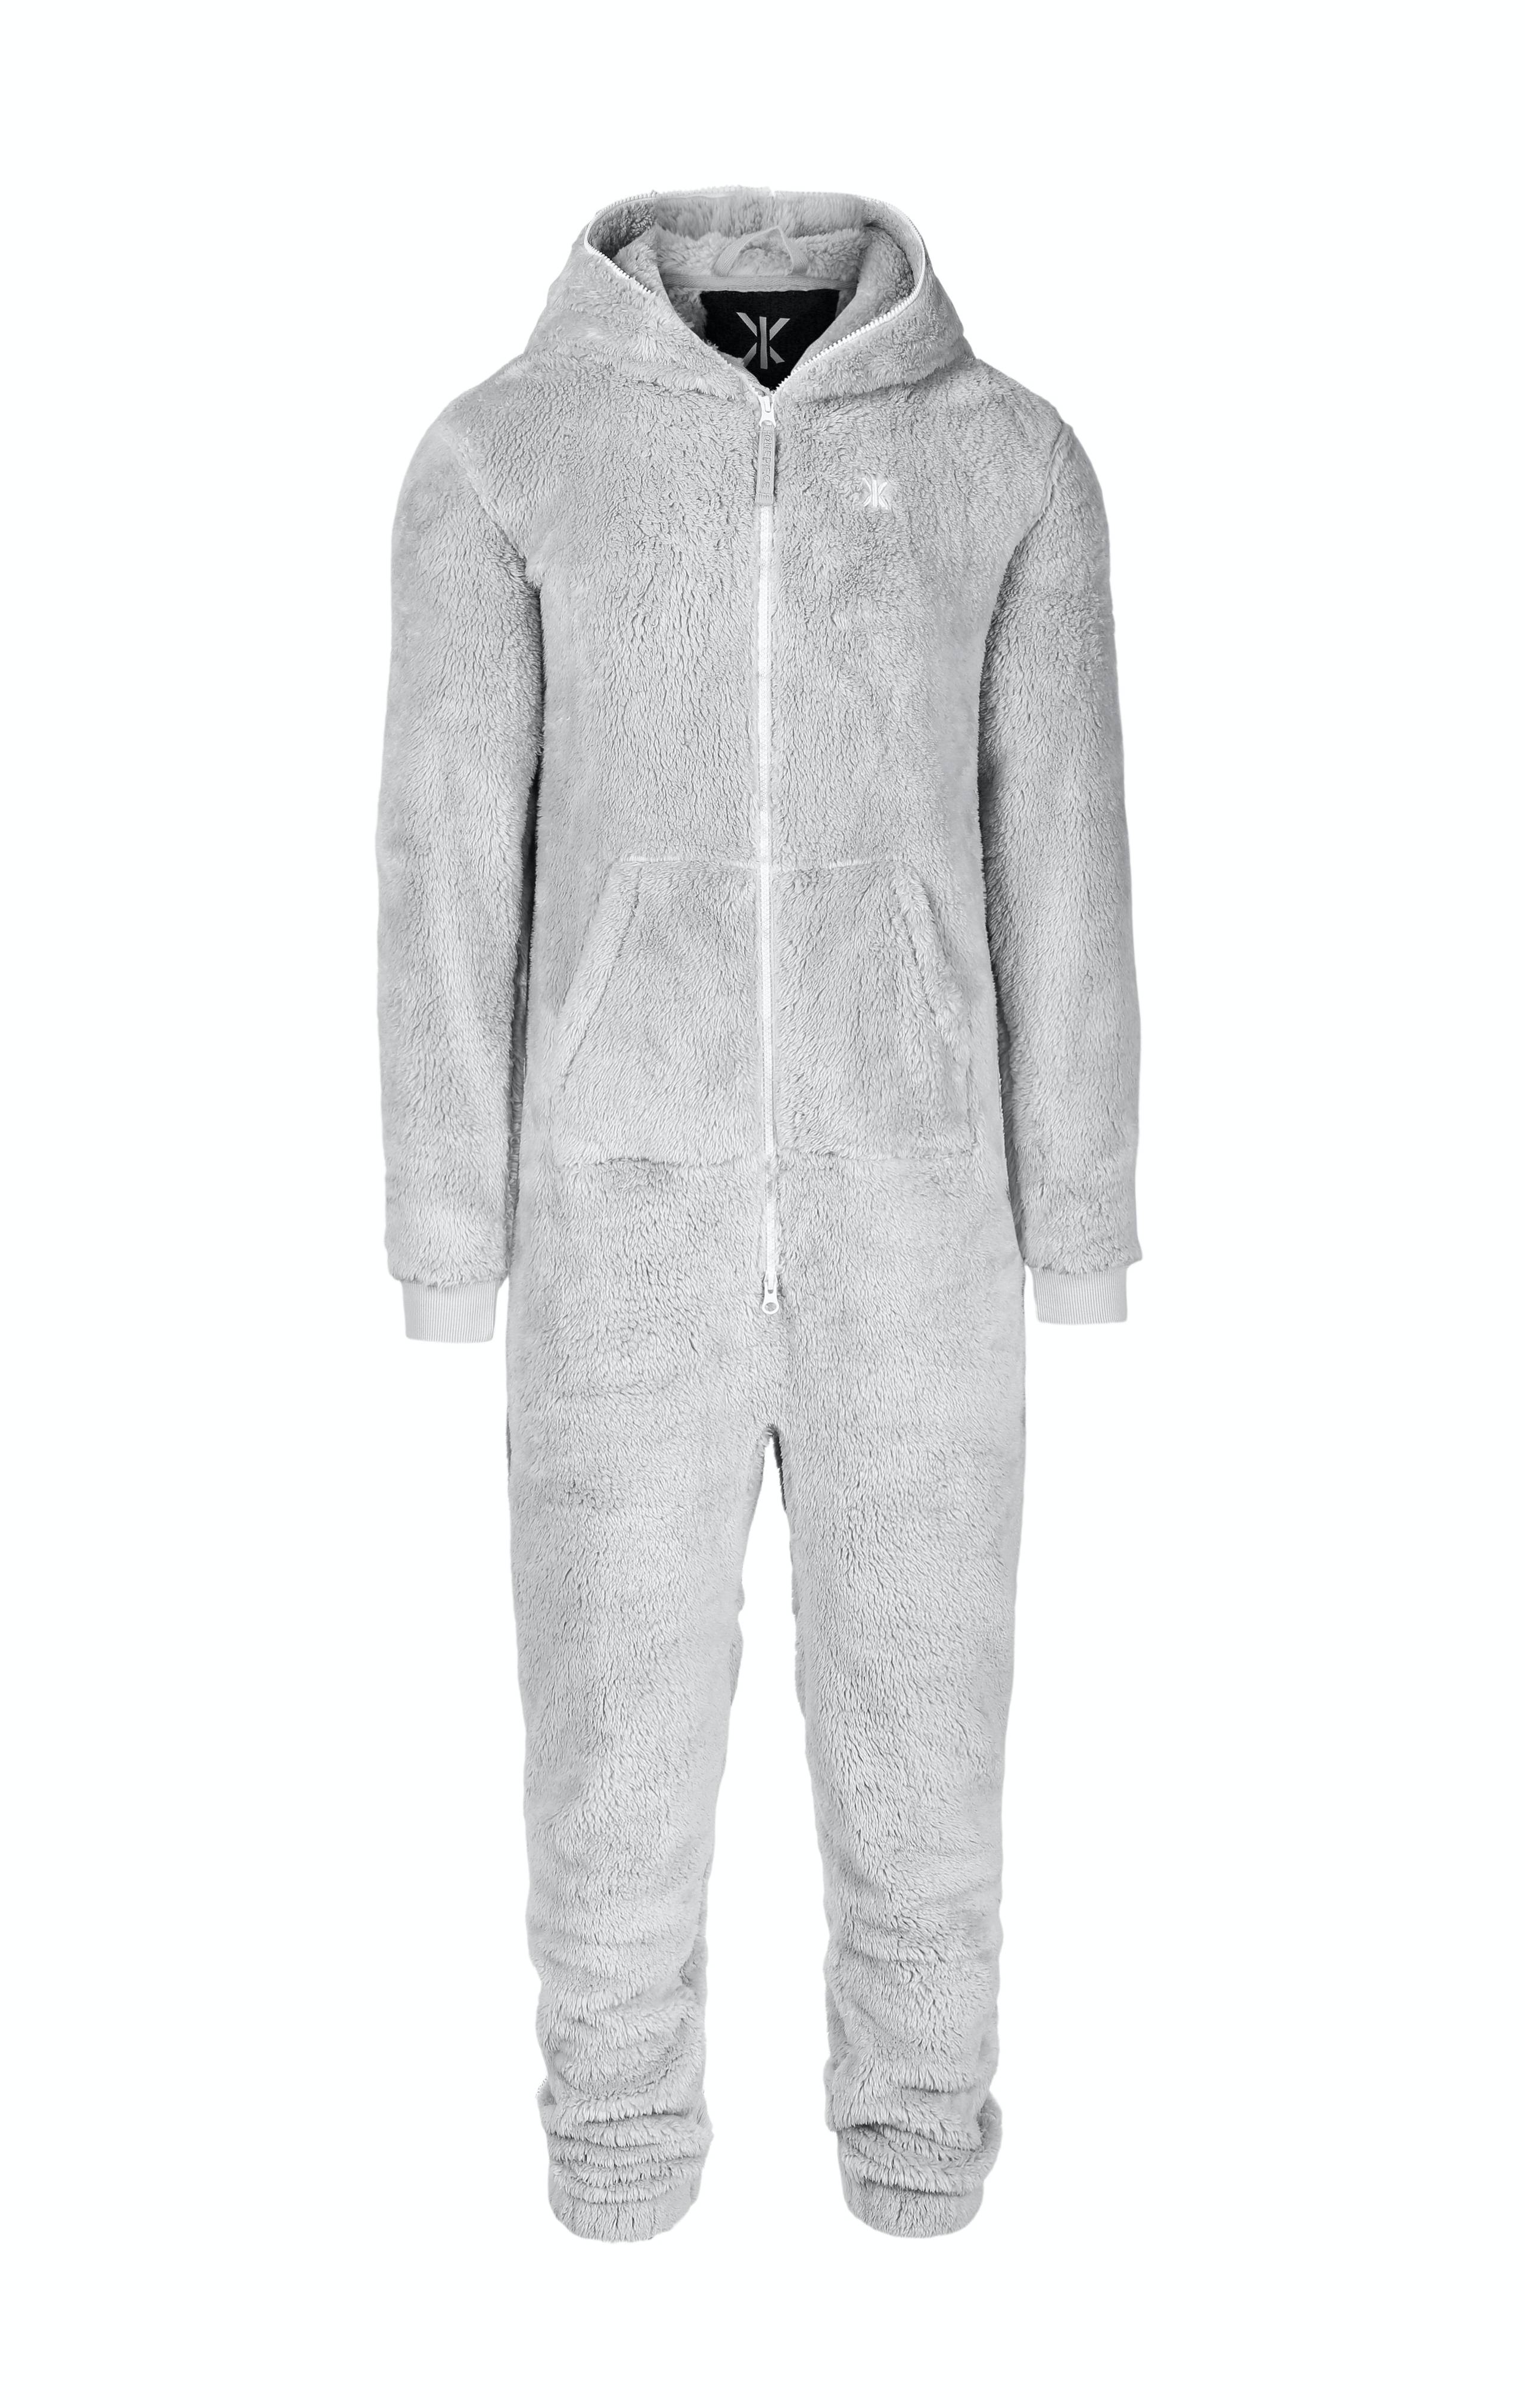 Onepiece The New Puppy Jumpsuit Light Grey - 1